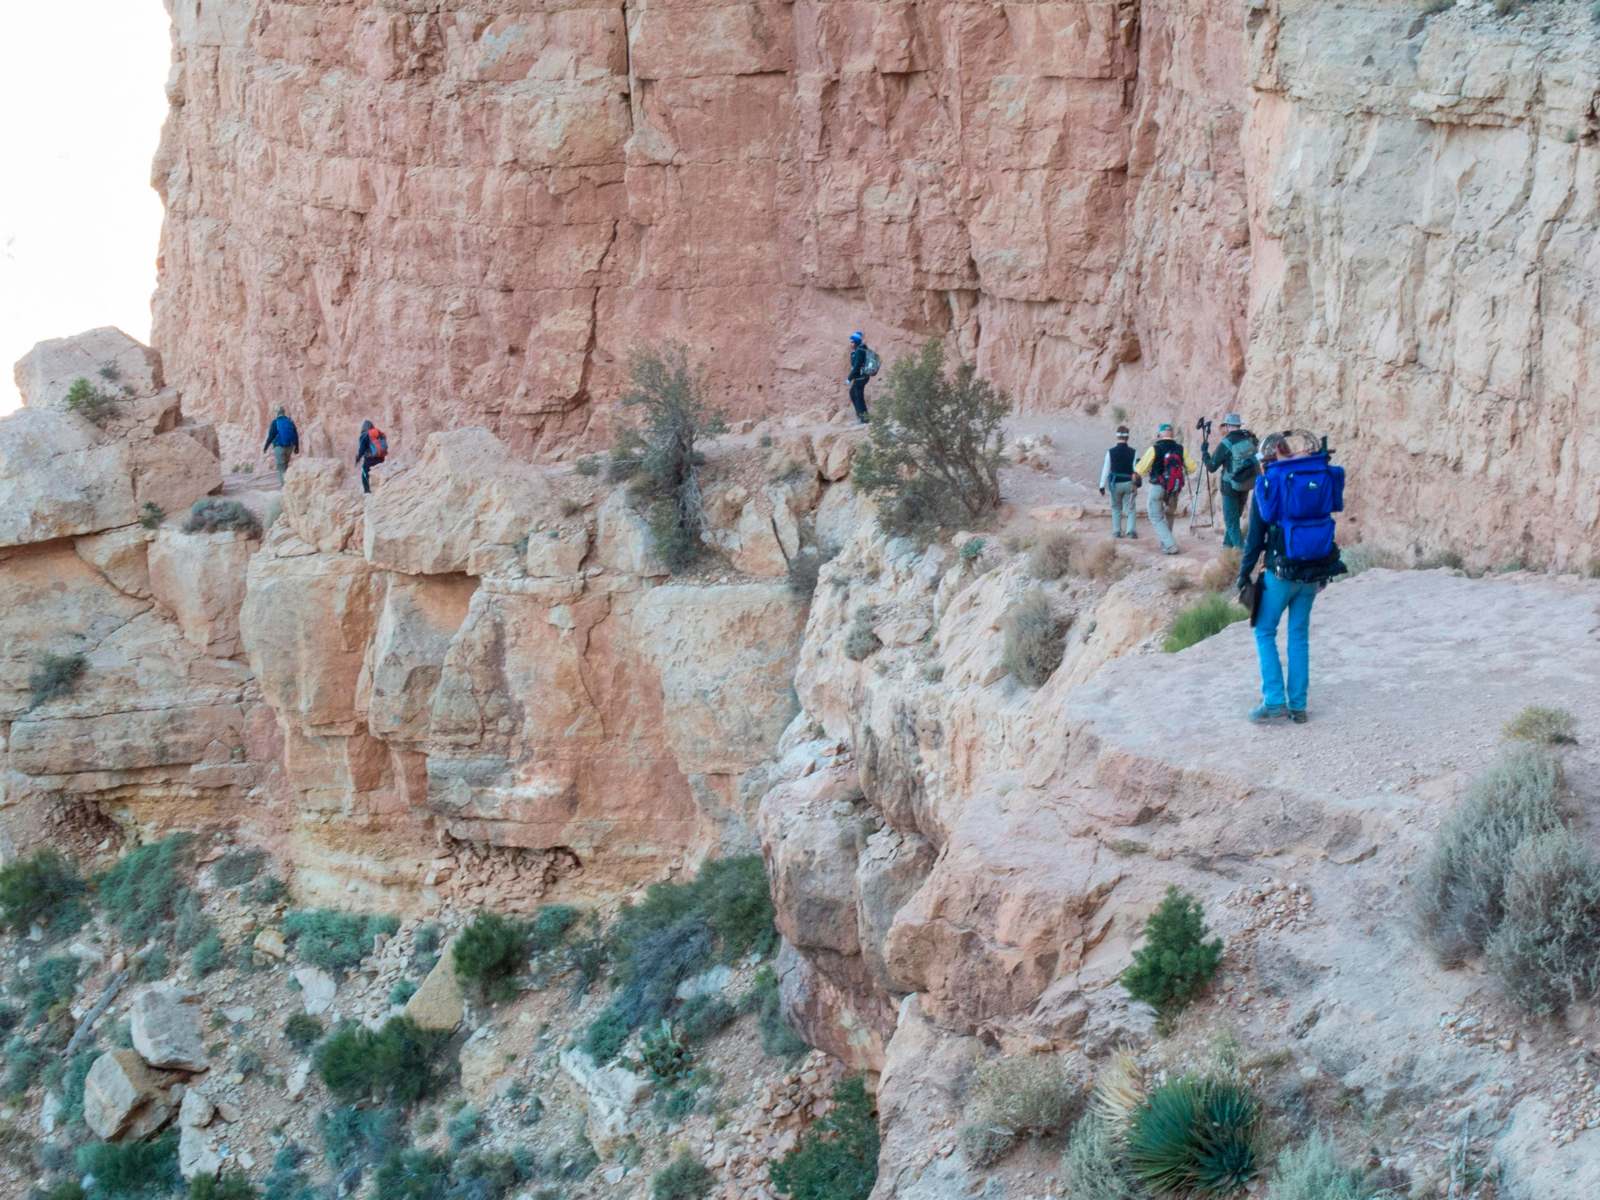 a group of people walking on a rocky cliff